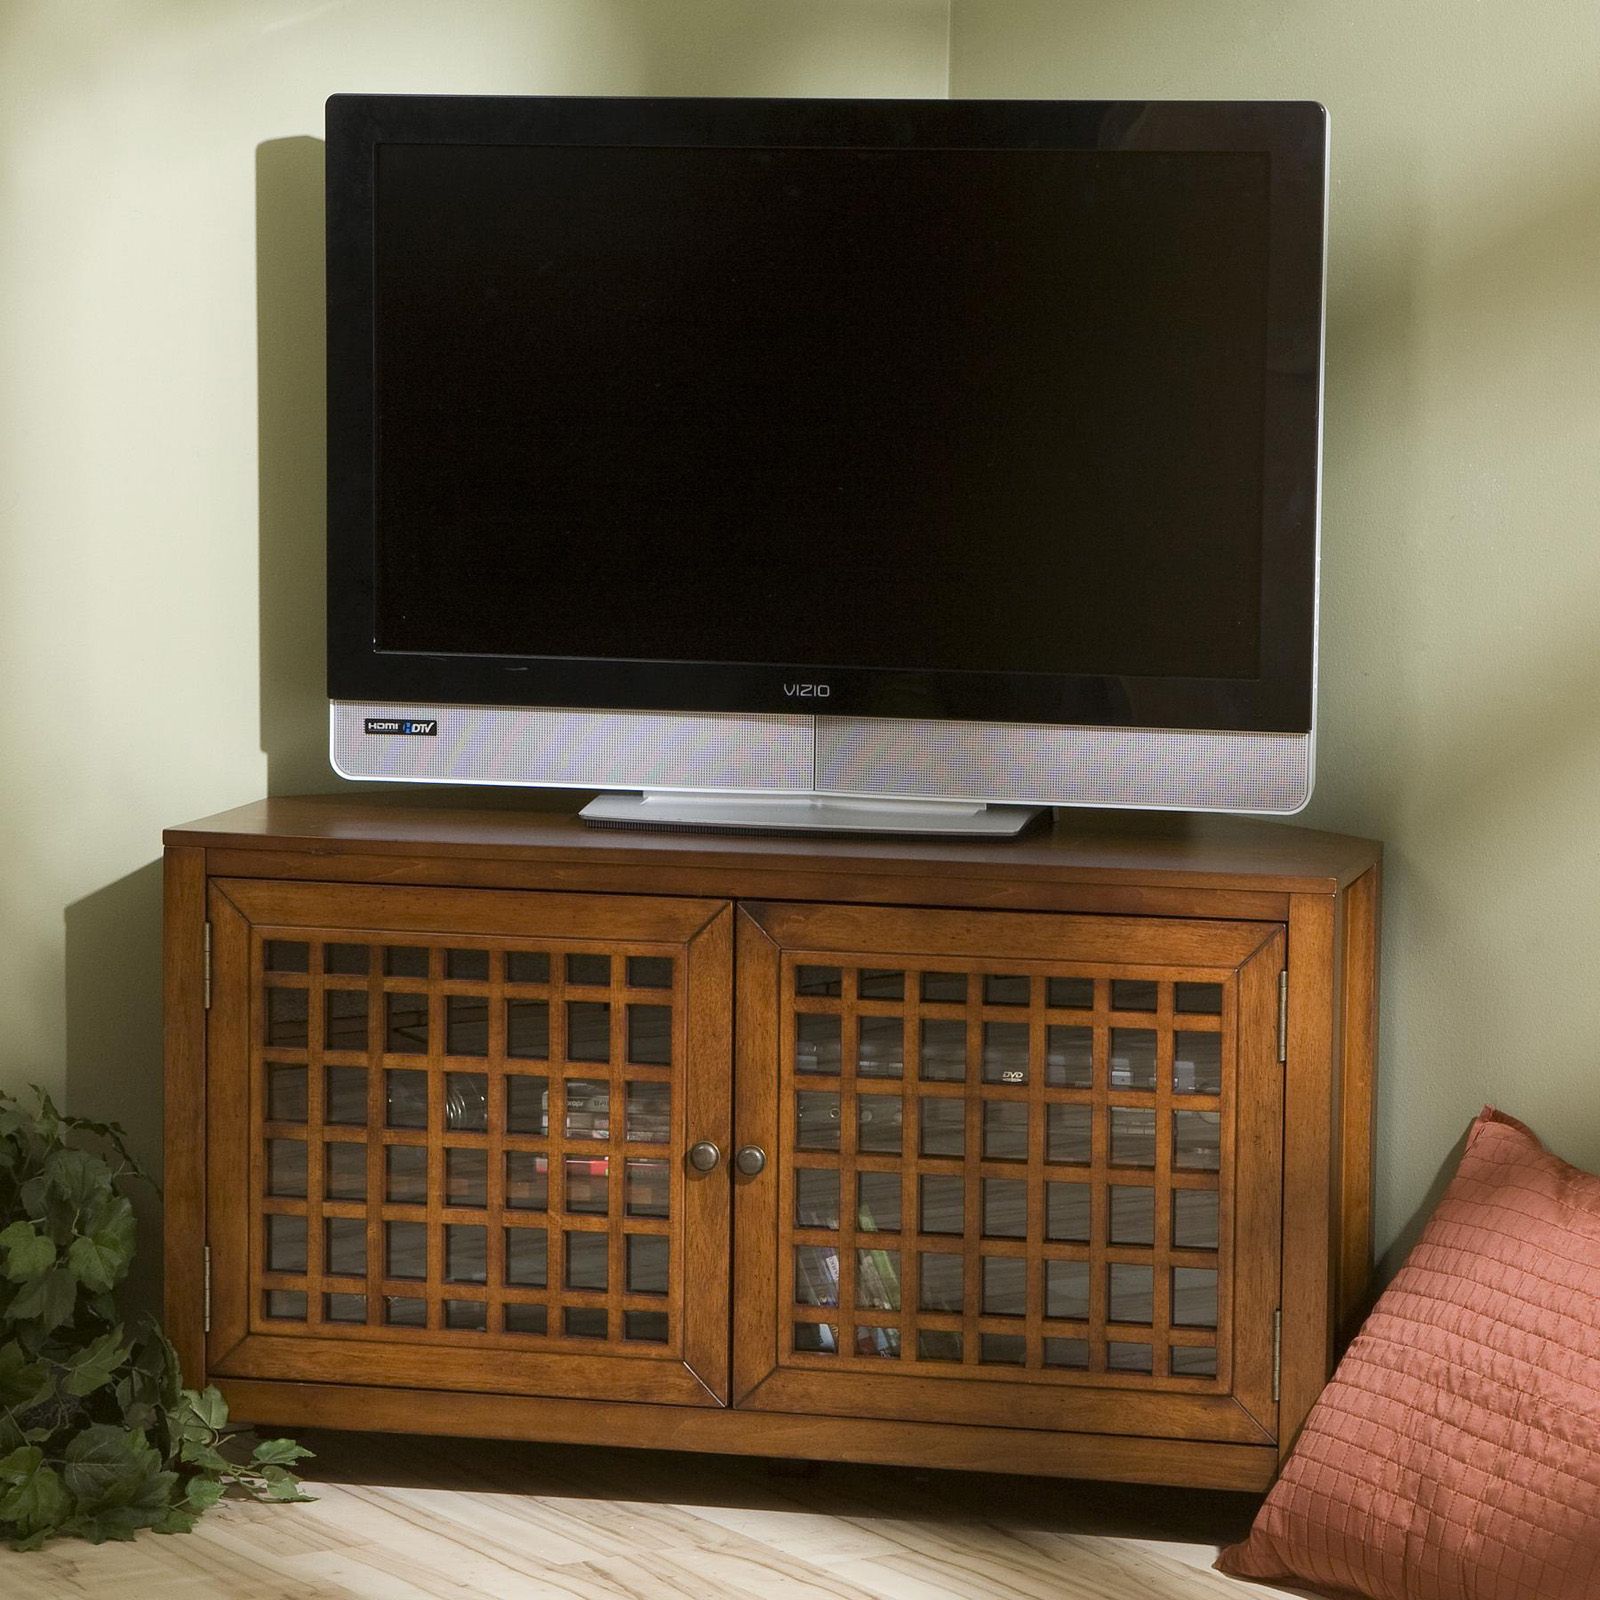 Narita Walnut Corner Media Stand – Tv Stands At Hayneedle For Walnut Tv Stands For Flat Screens (View 13 of 15)